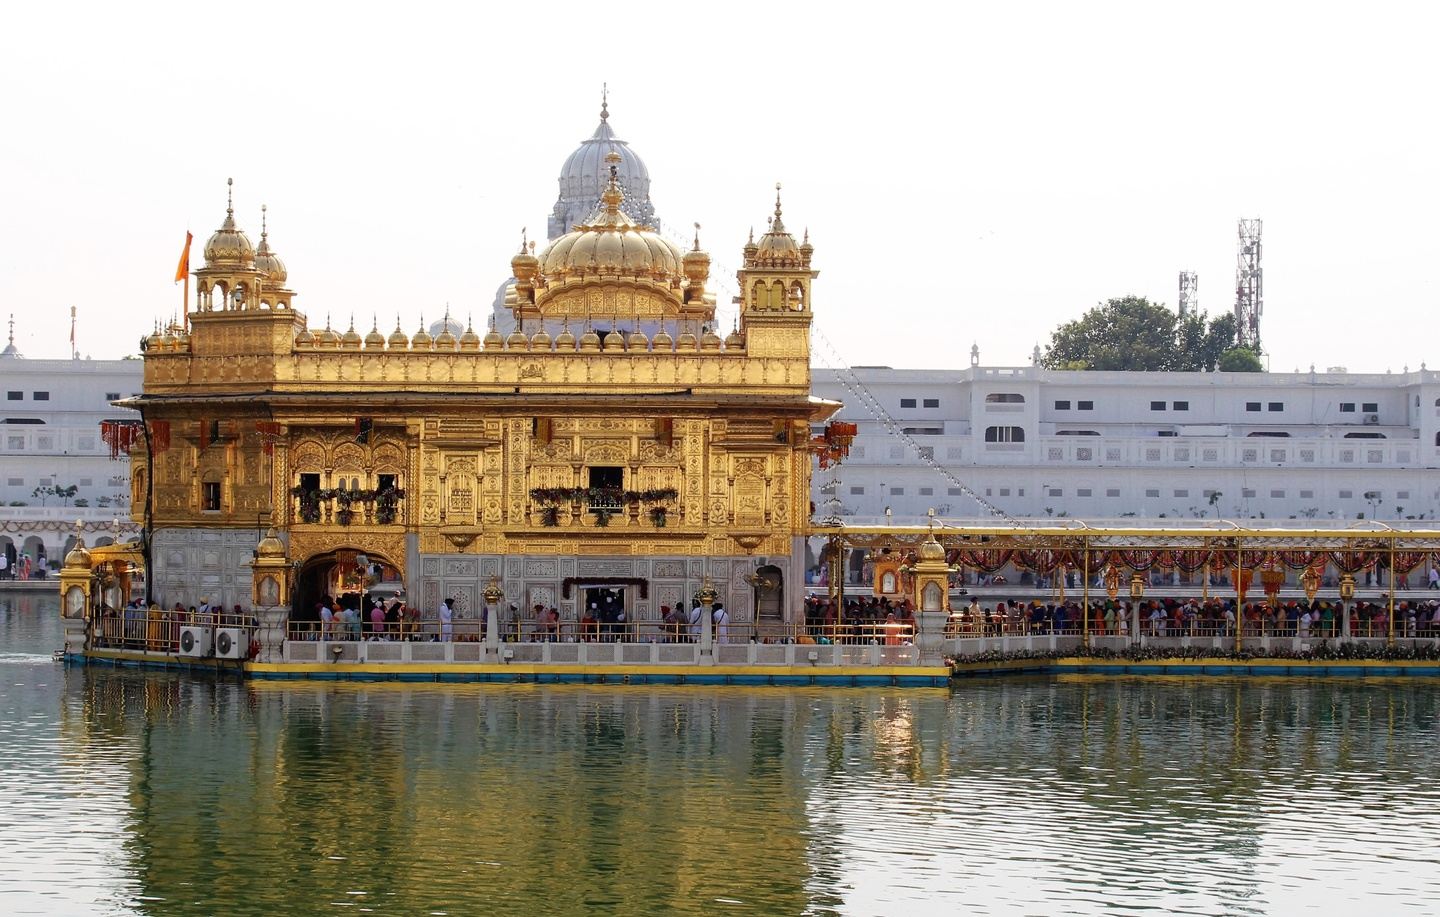 The Hill Stations of North India & Golden Temple Tour